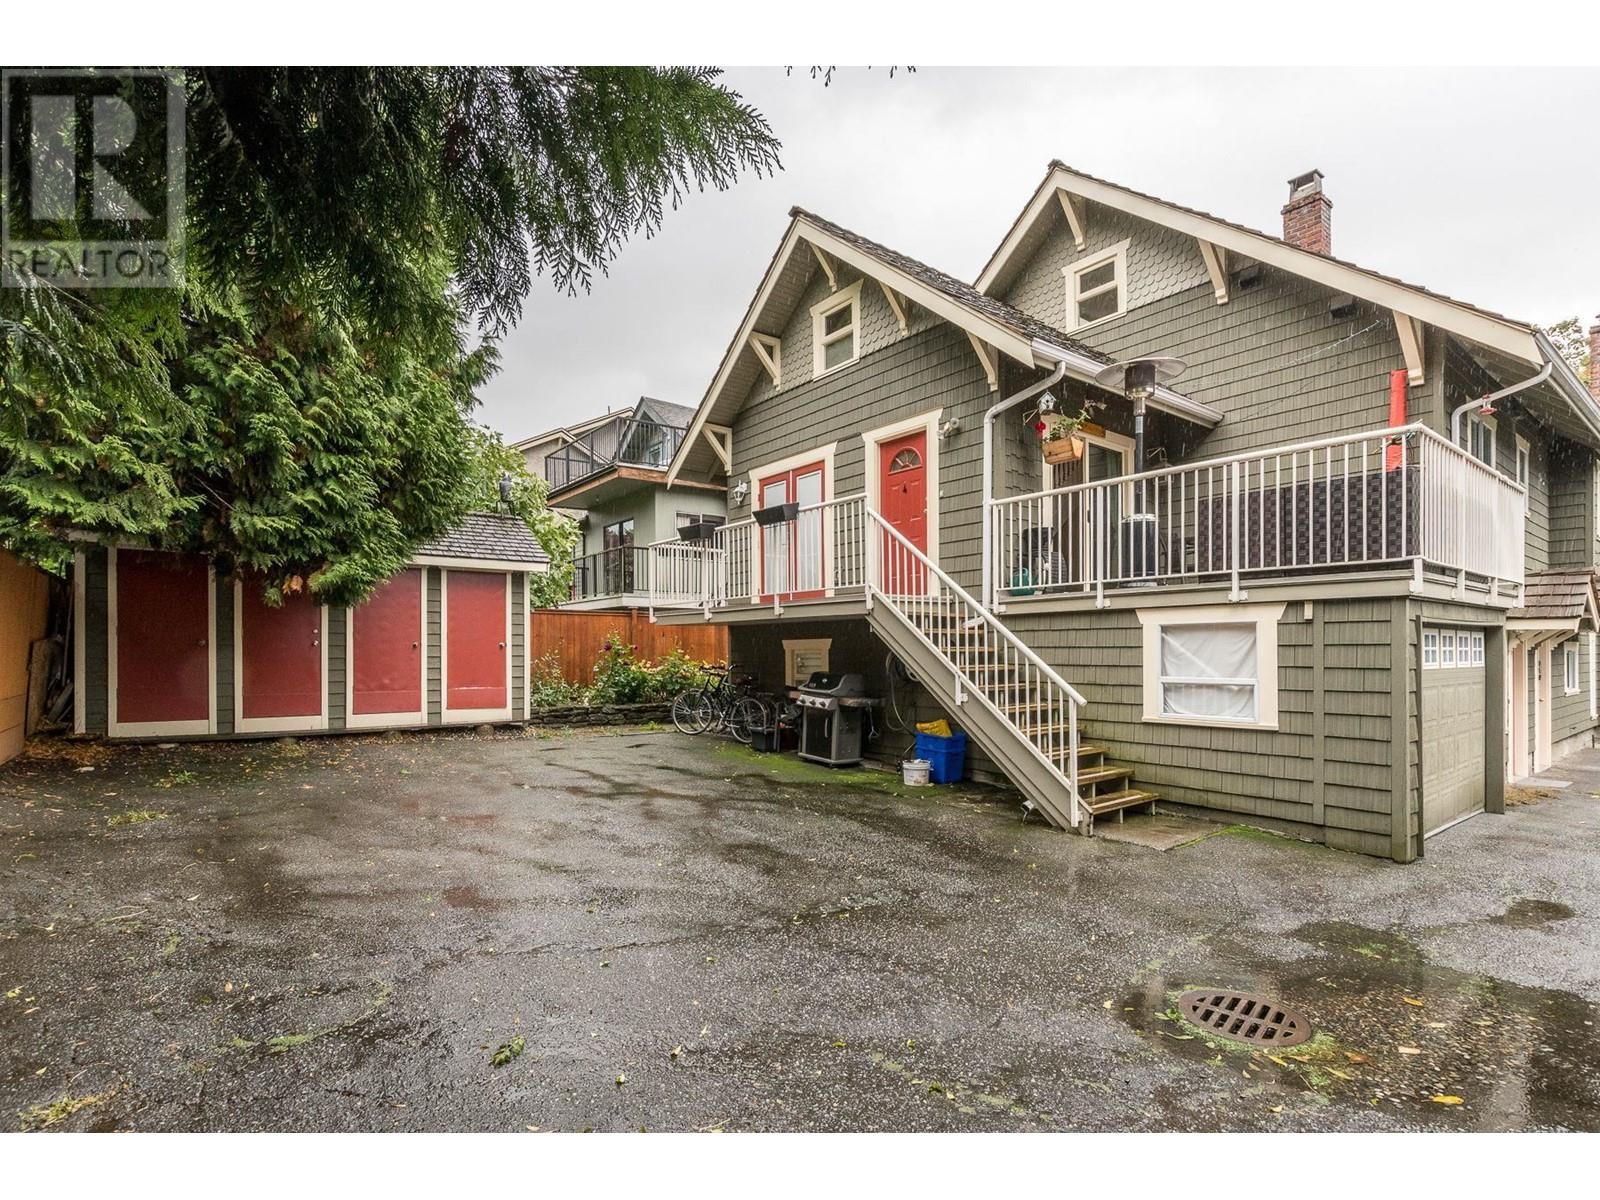 Listing Picture 27 of 29 : 4 2535 W 6TH AVENUE, Vancouver / 溫哥華 - 魯藝地產 Yvonne Lu Group - MLS Medallion Club Member